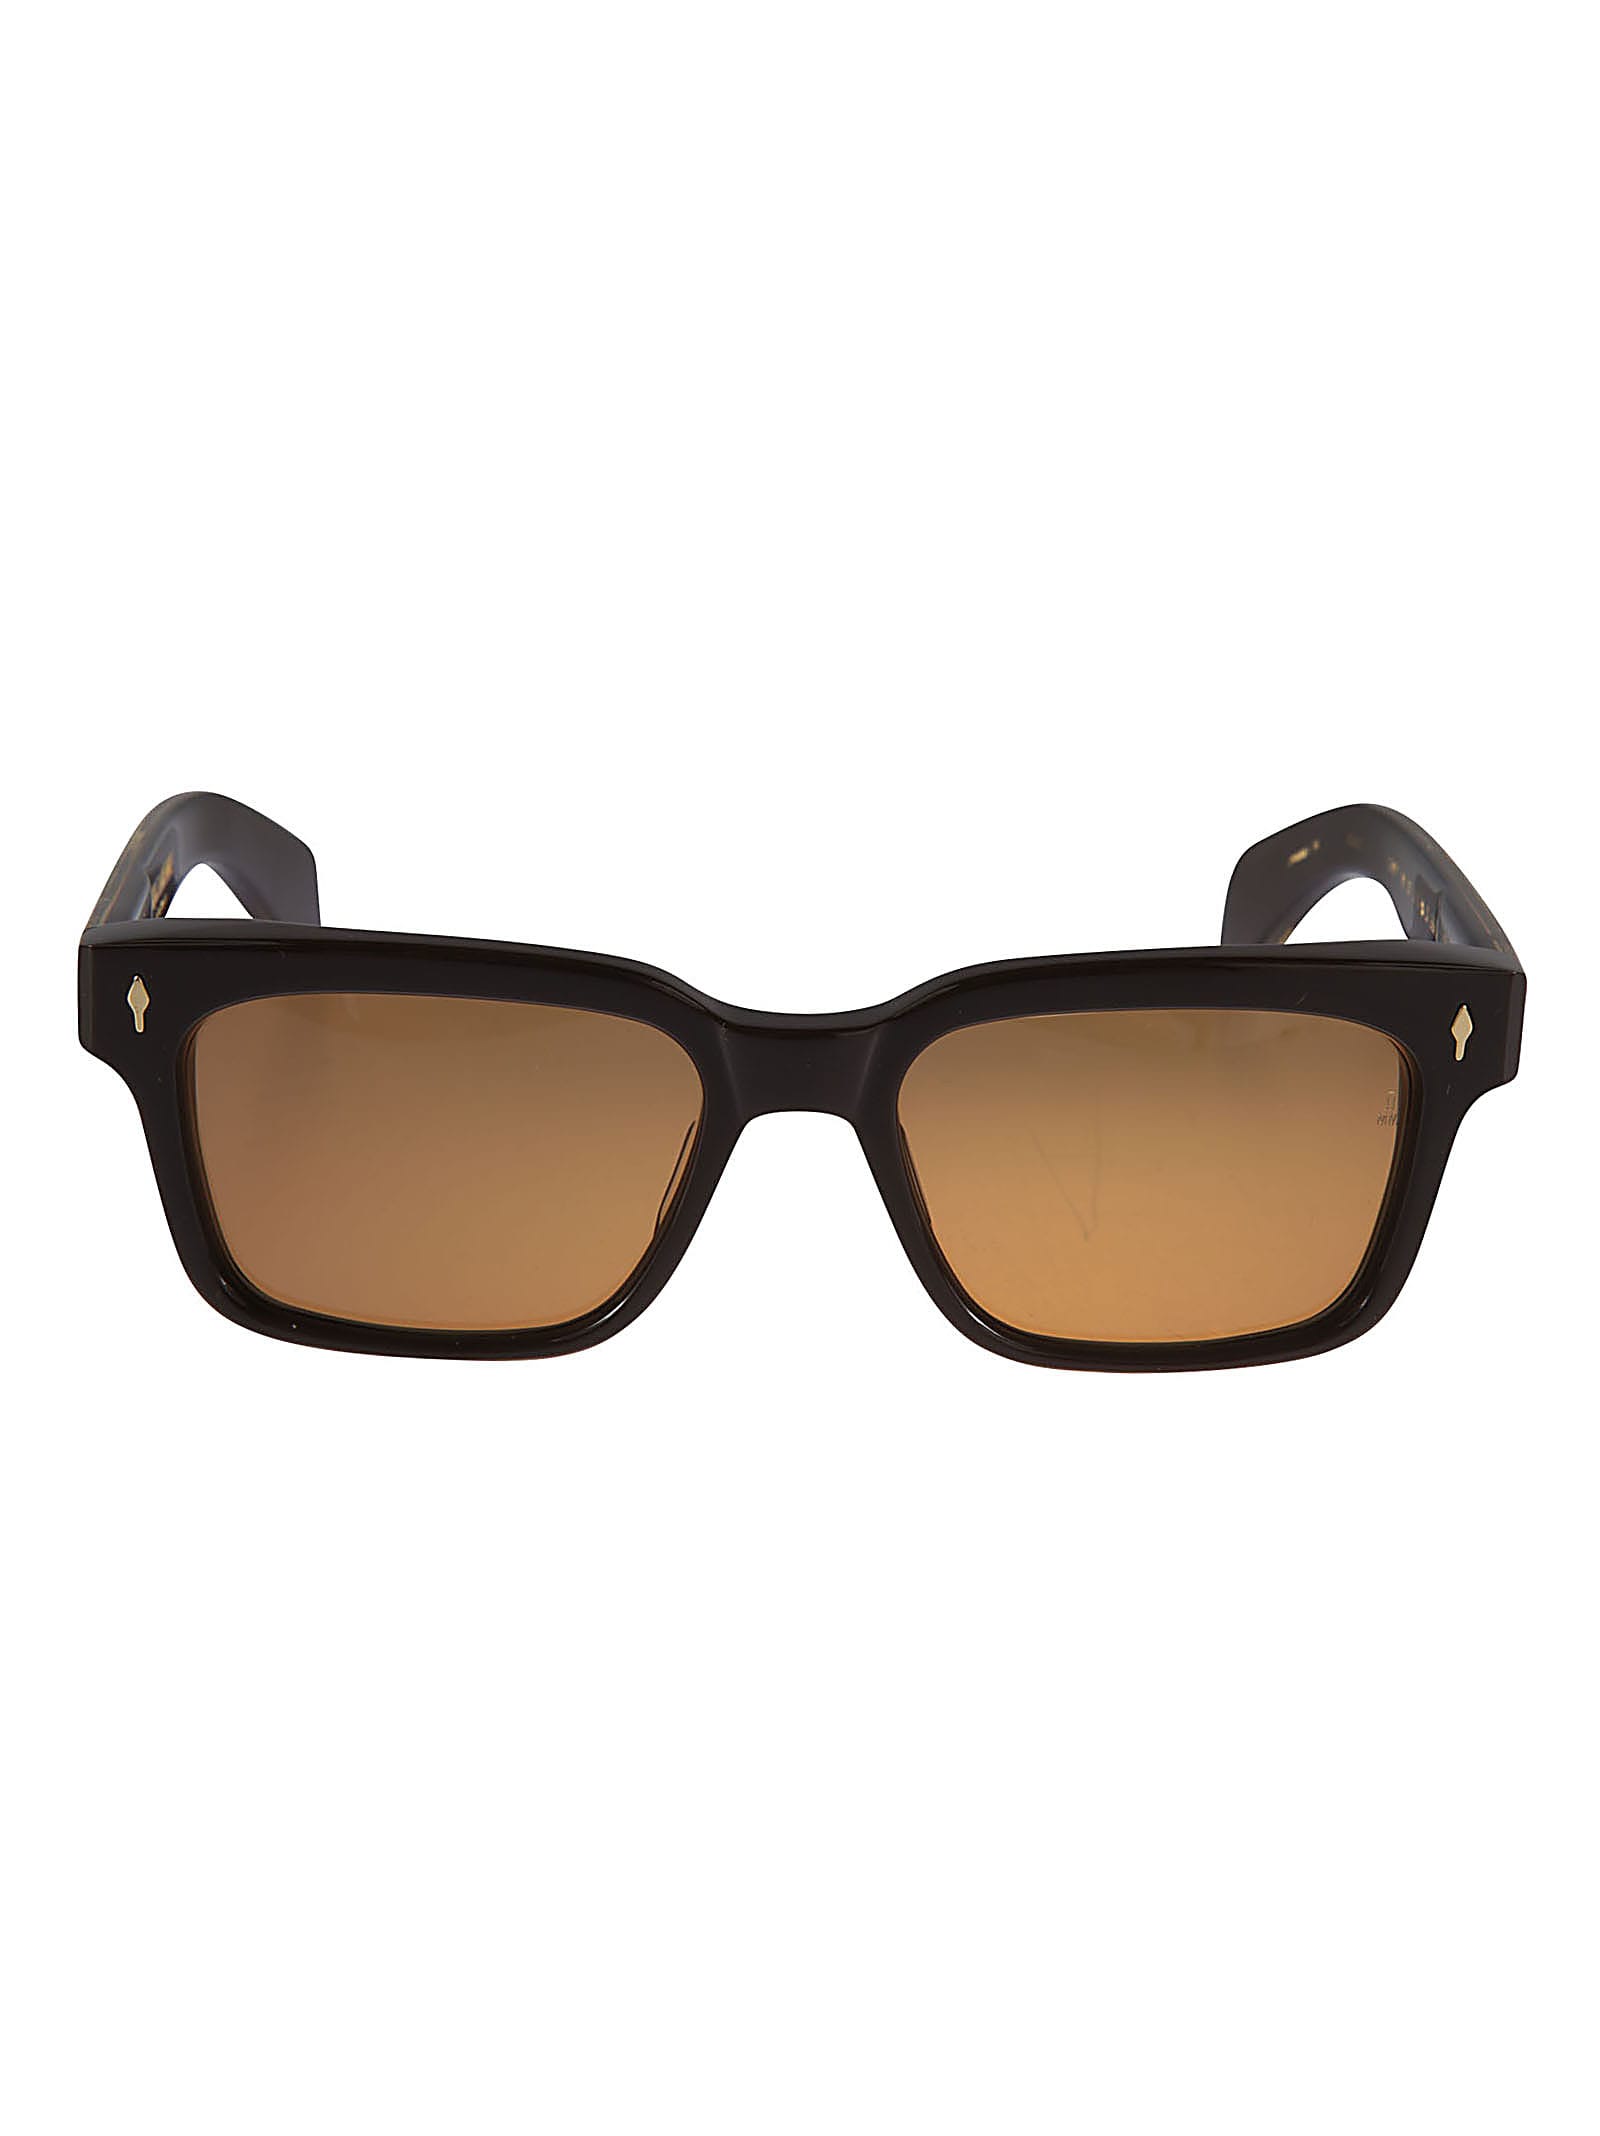 Jacques Marie Mage Square Frame Sunglasses